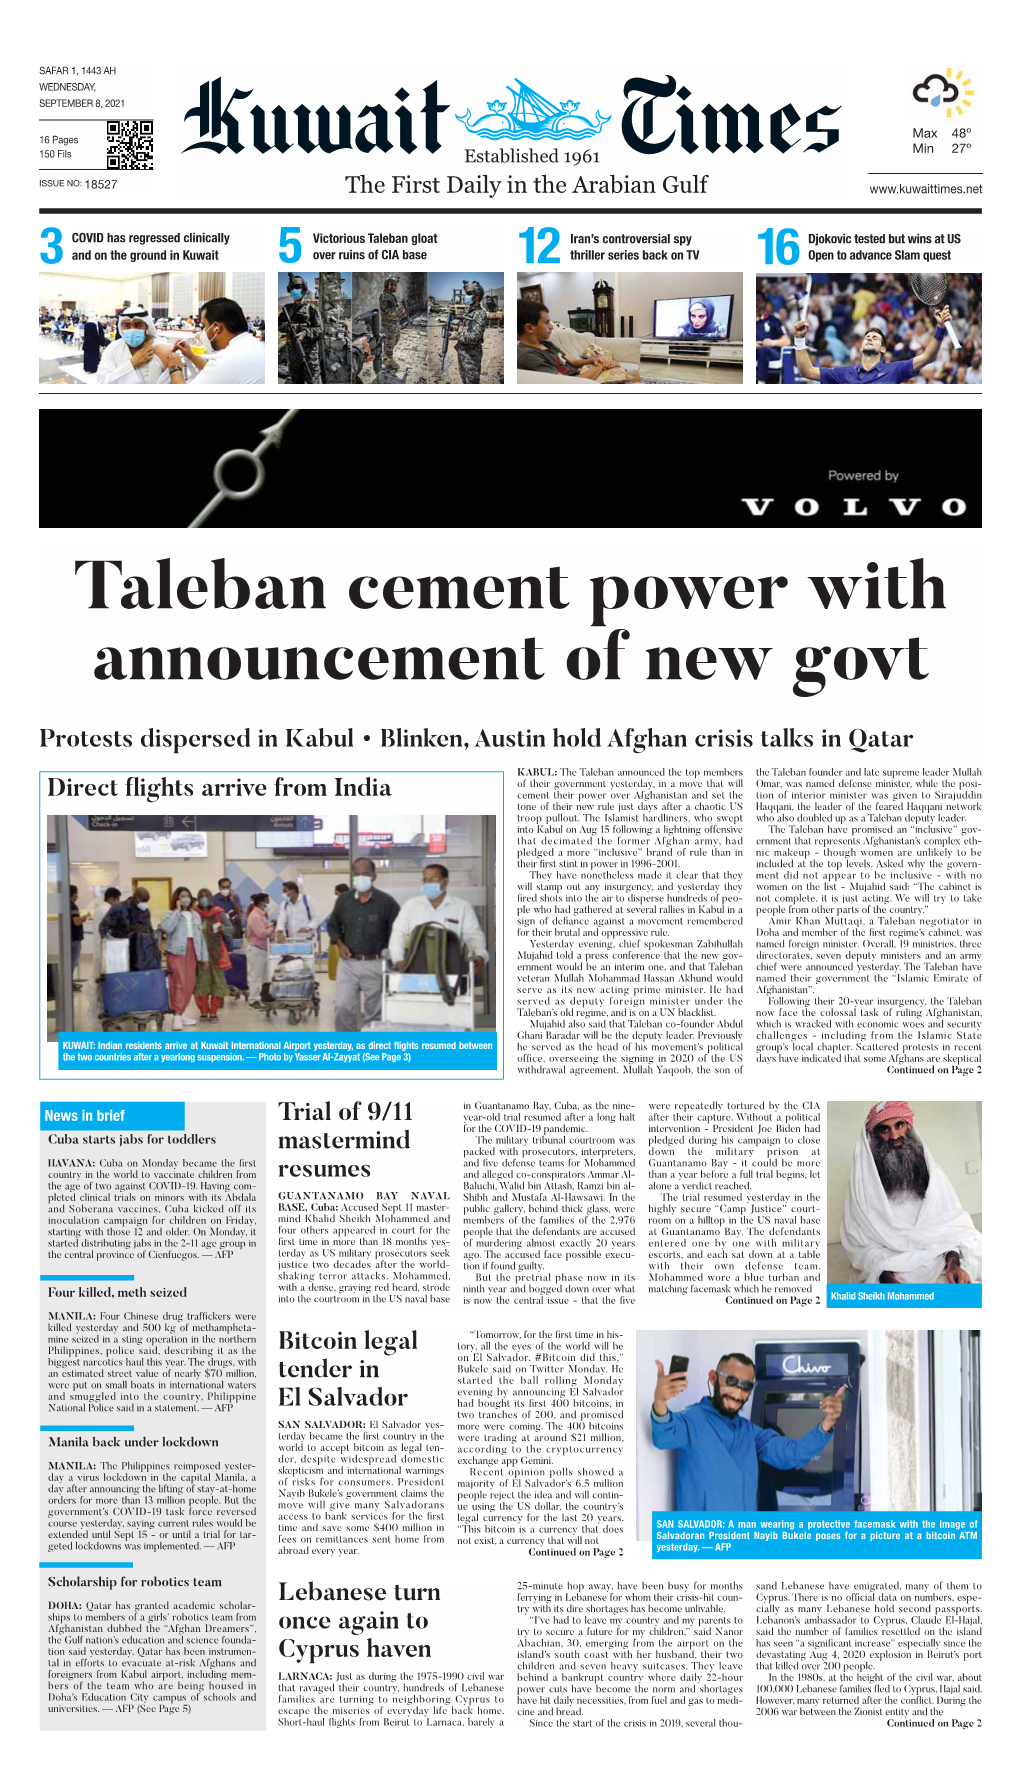 Taleban Cement Power with Announcement of New Govt